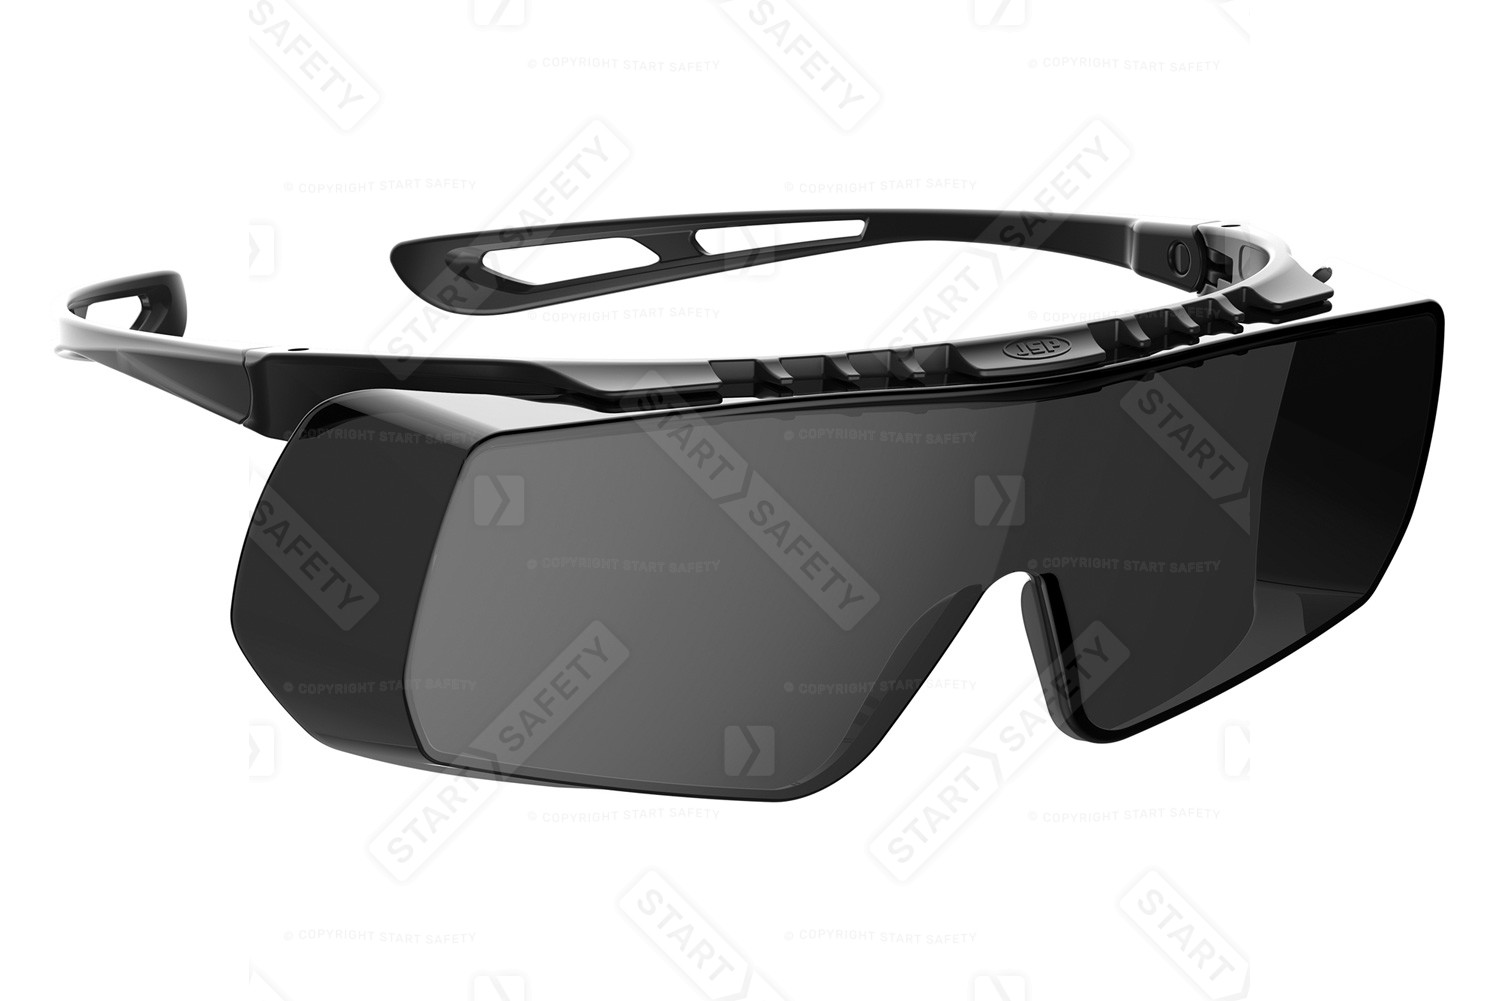 Smoked Lenses For Protection From The Sun On Overspec Safety Specatcles